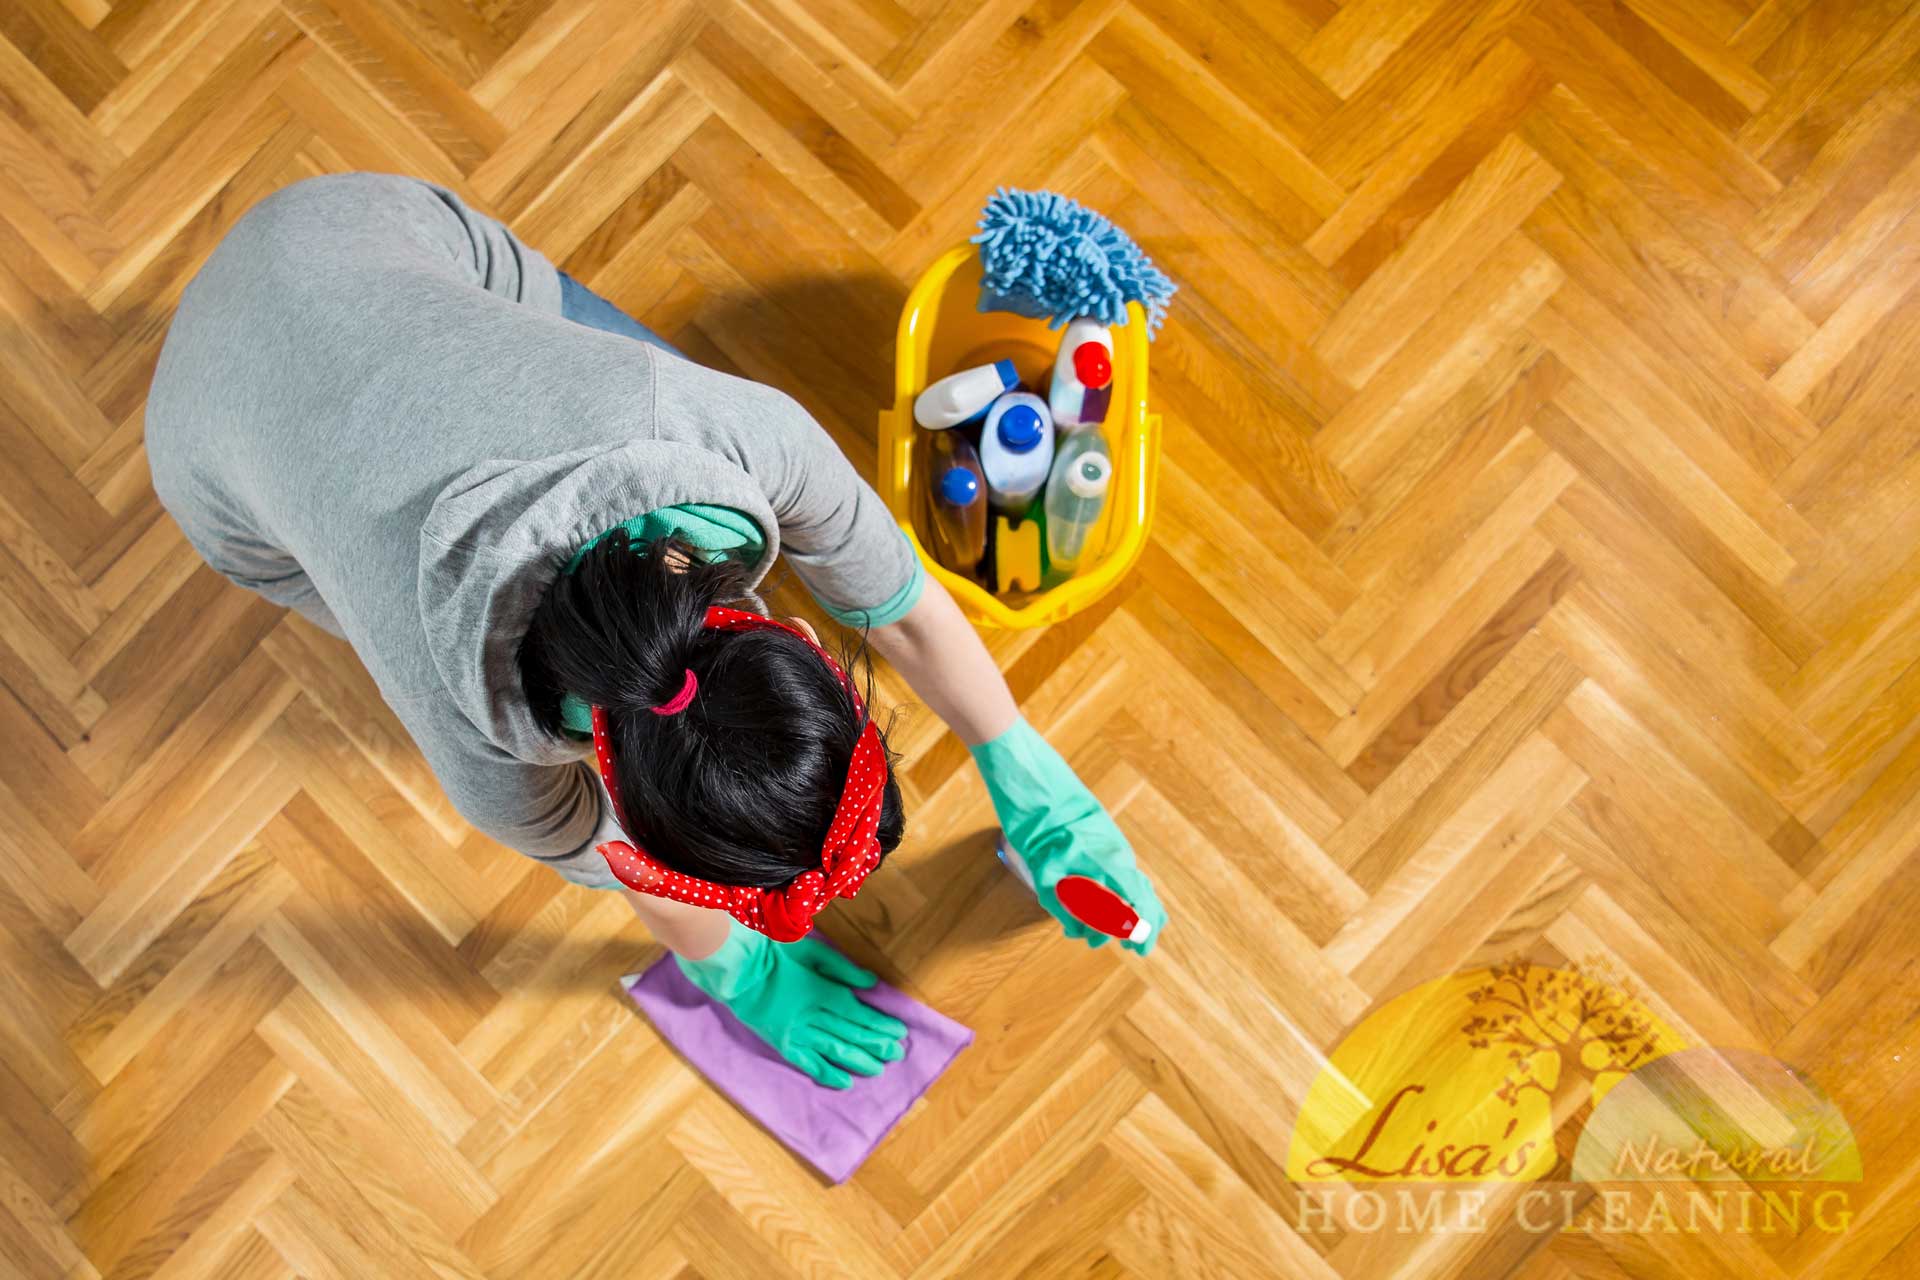 Atlanta Hardwood Floors Cleaning Service | Get a Quote | Lisa's Natural